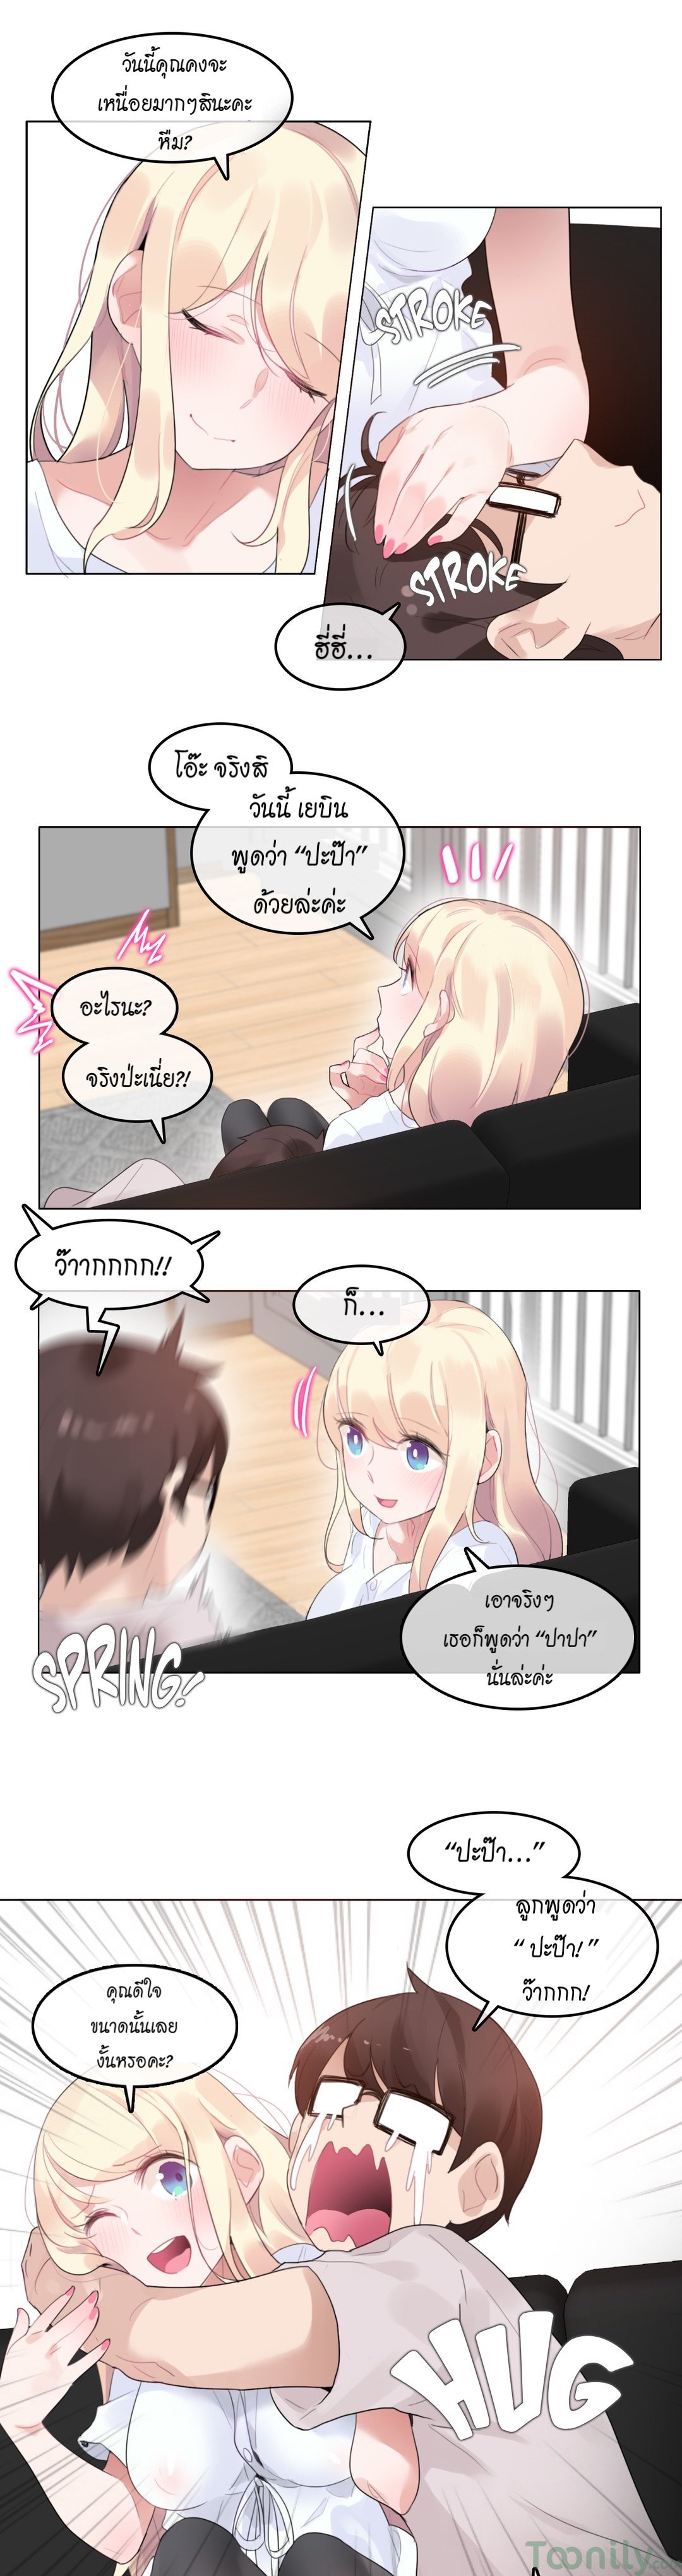 A Pervert’s Daily Life 59 07